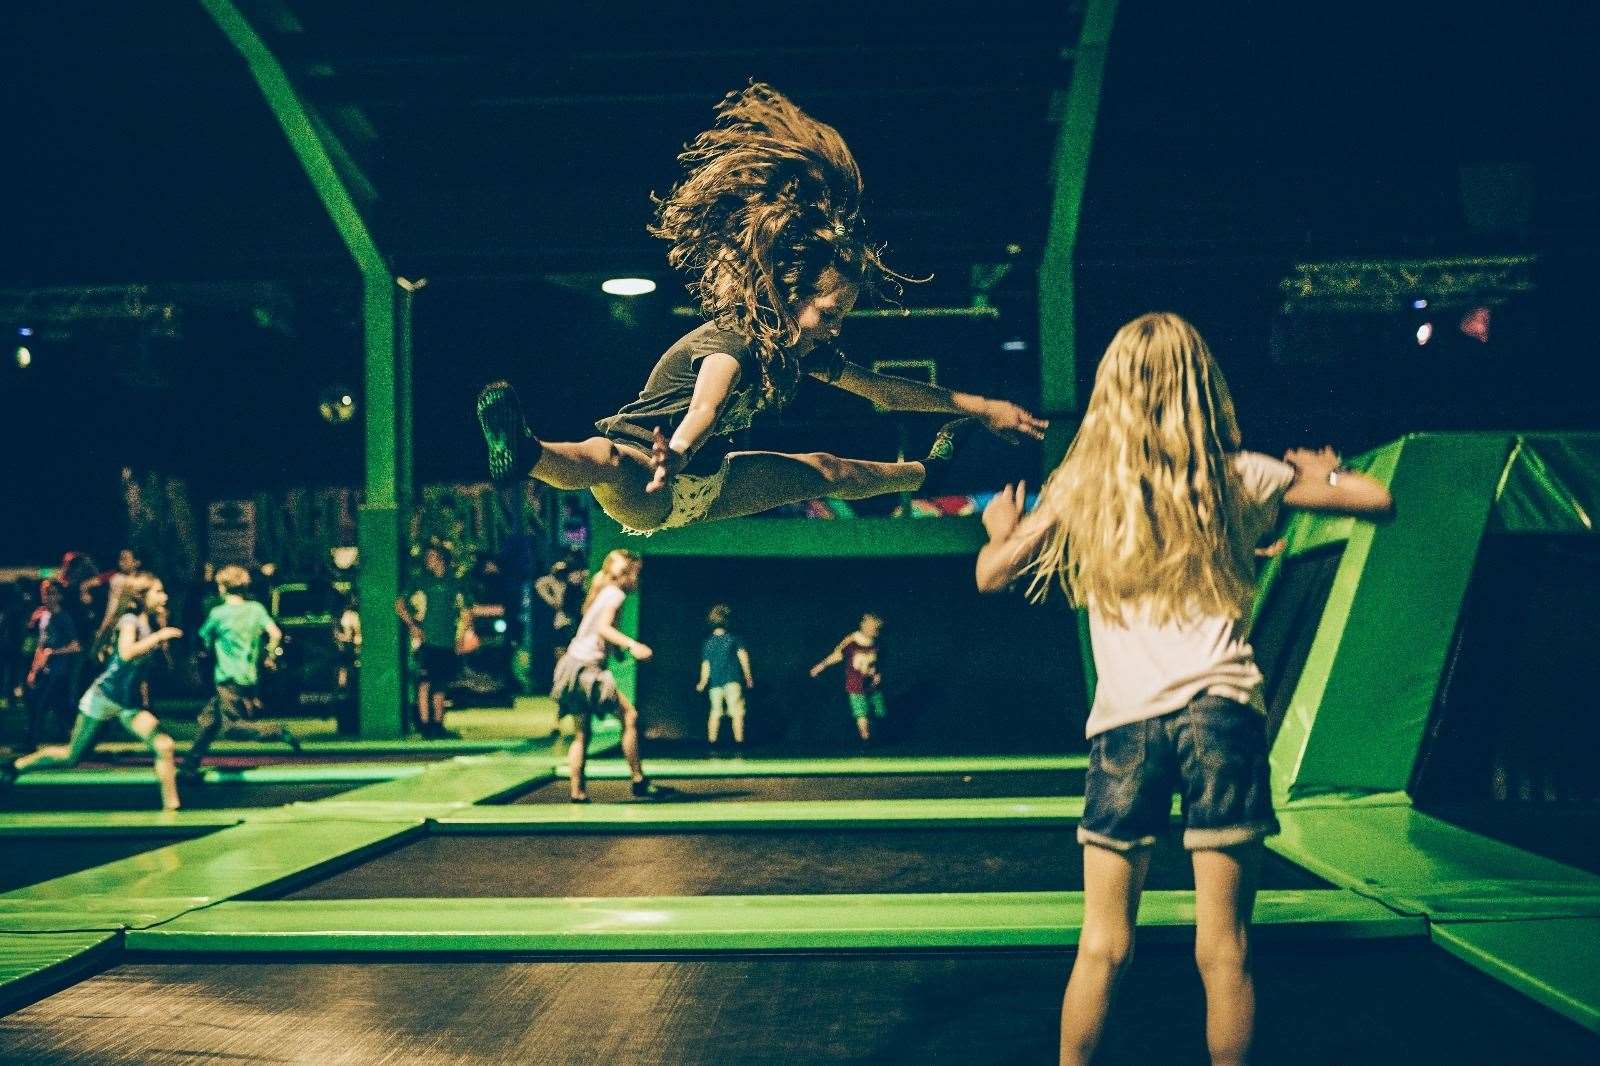 Flip Out in Chatham is offering unlimited visits for £25